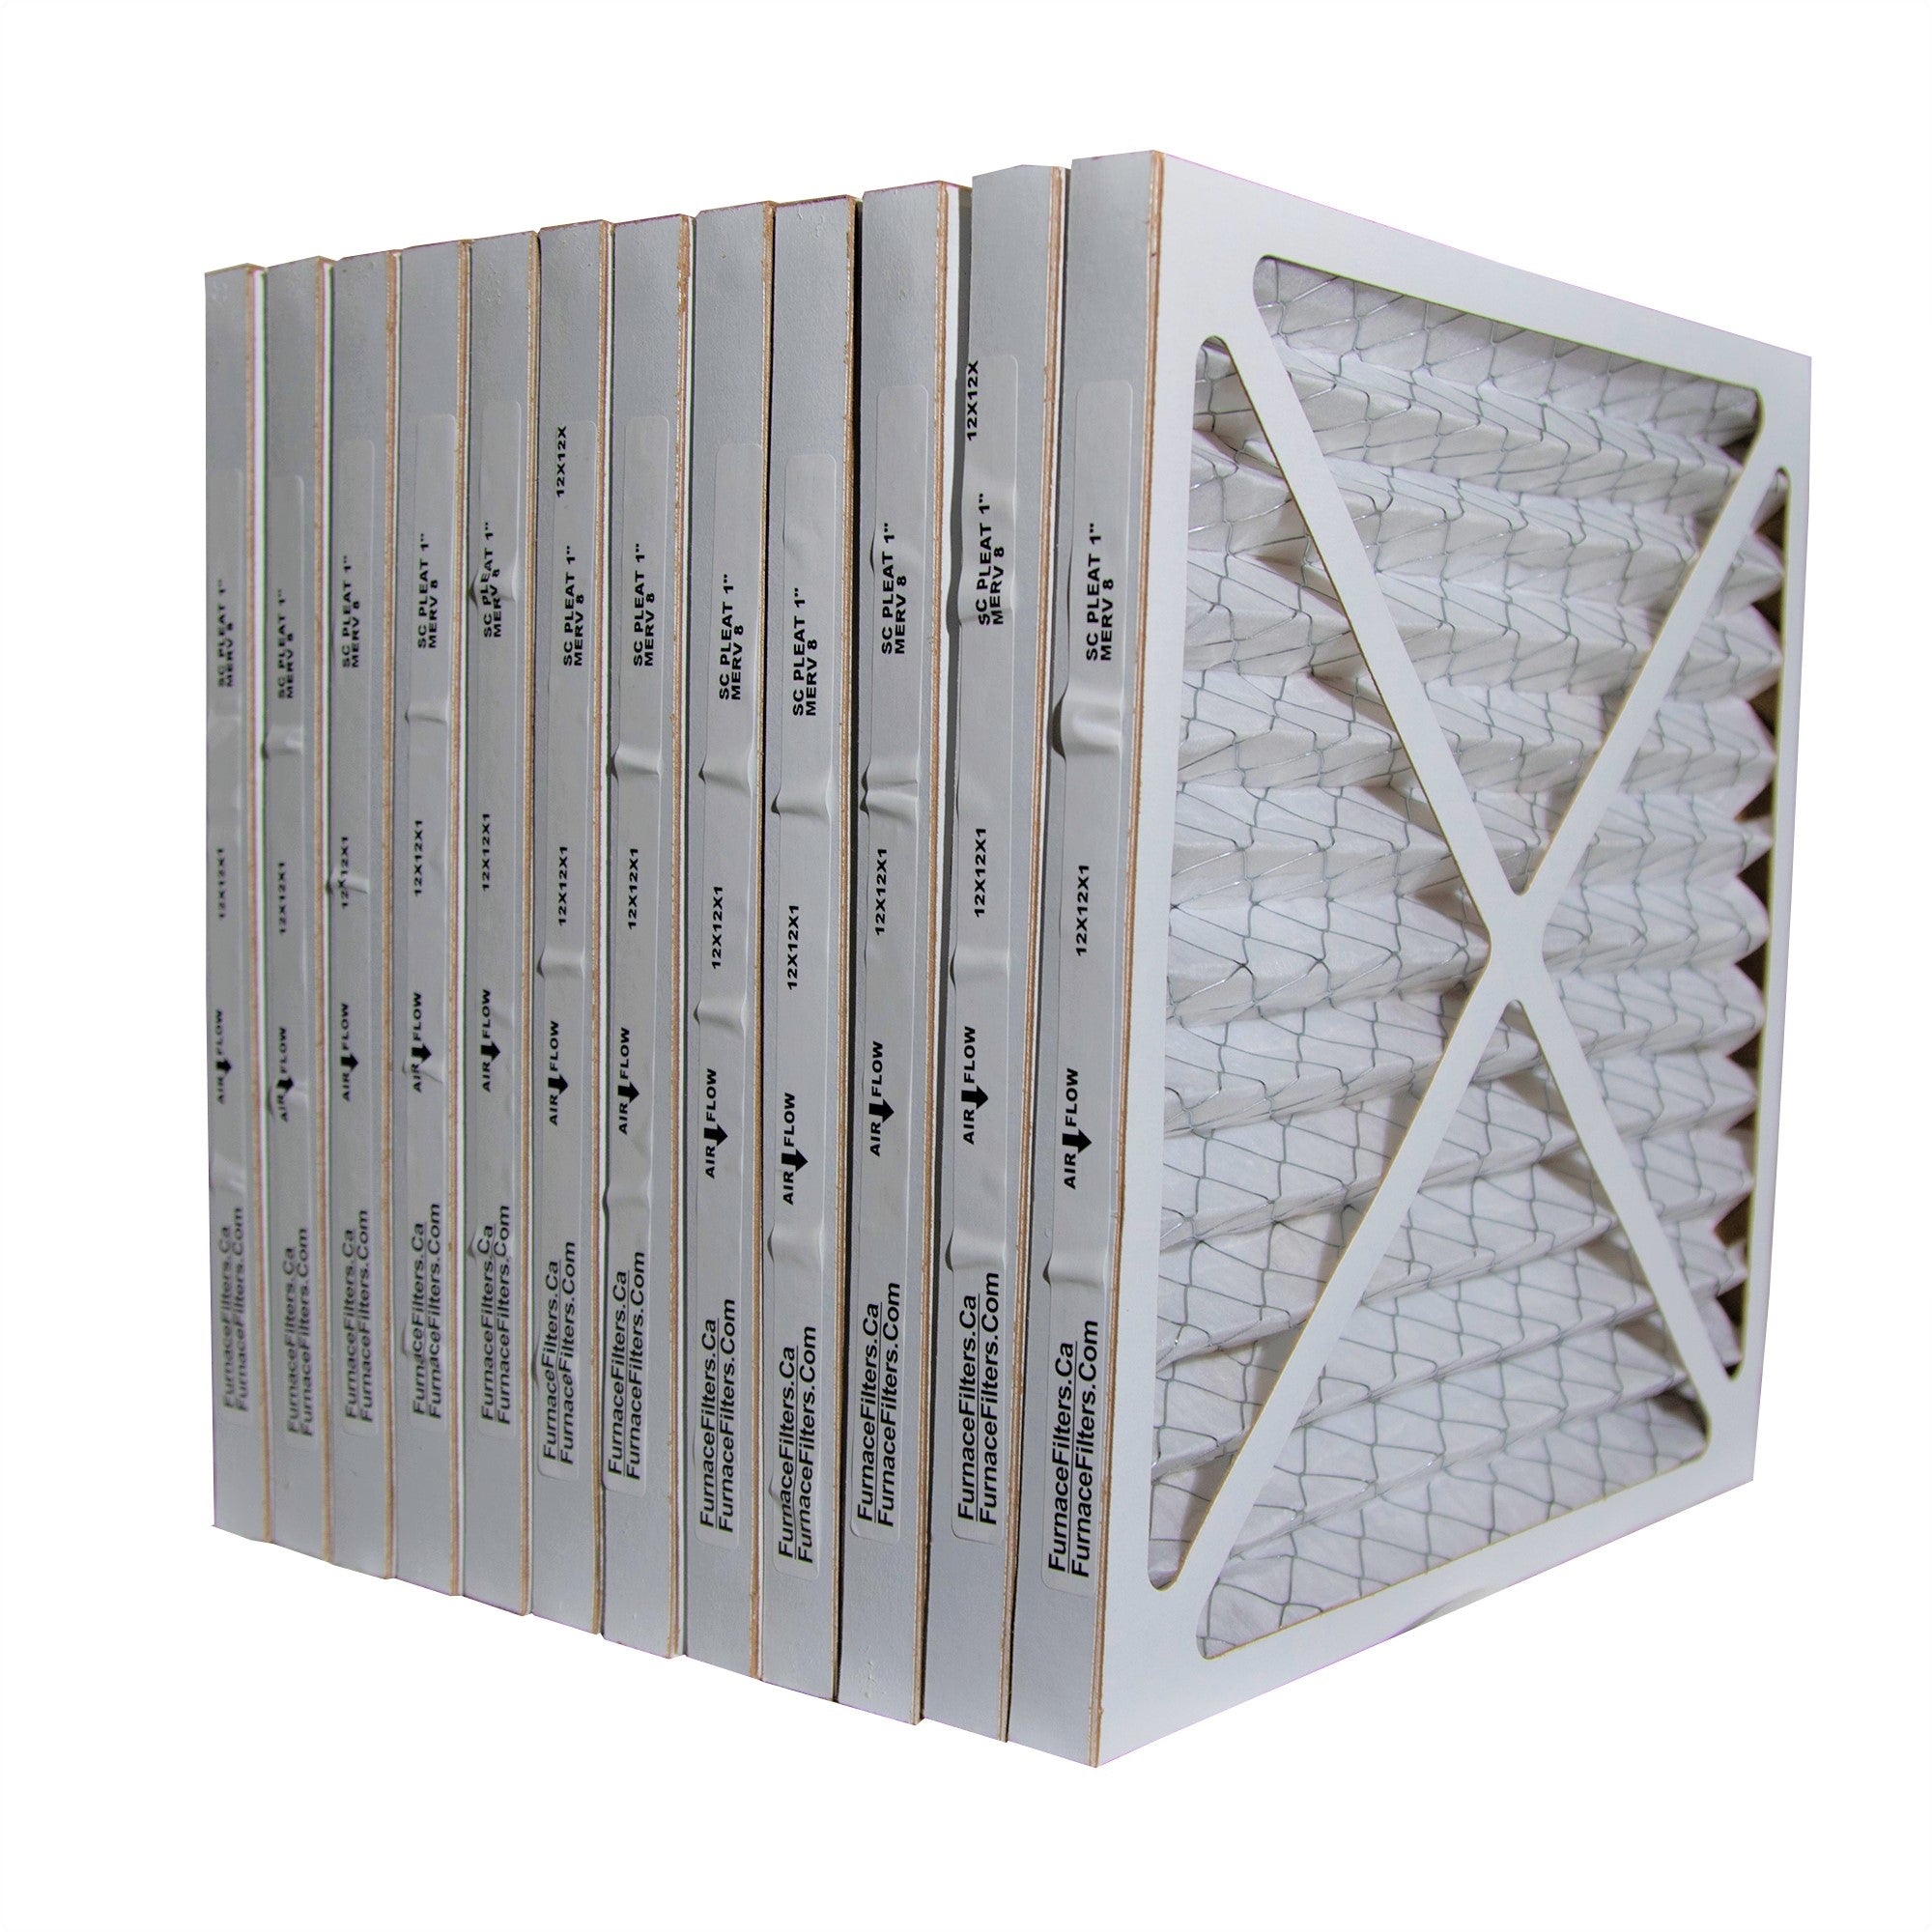 12x12x1 Furnace Filter MERV 8 Pleated Filters. Case of 12